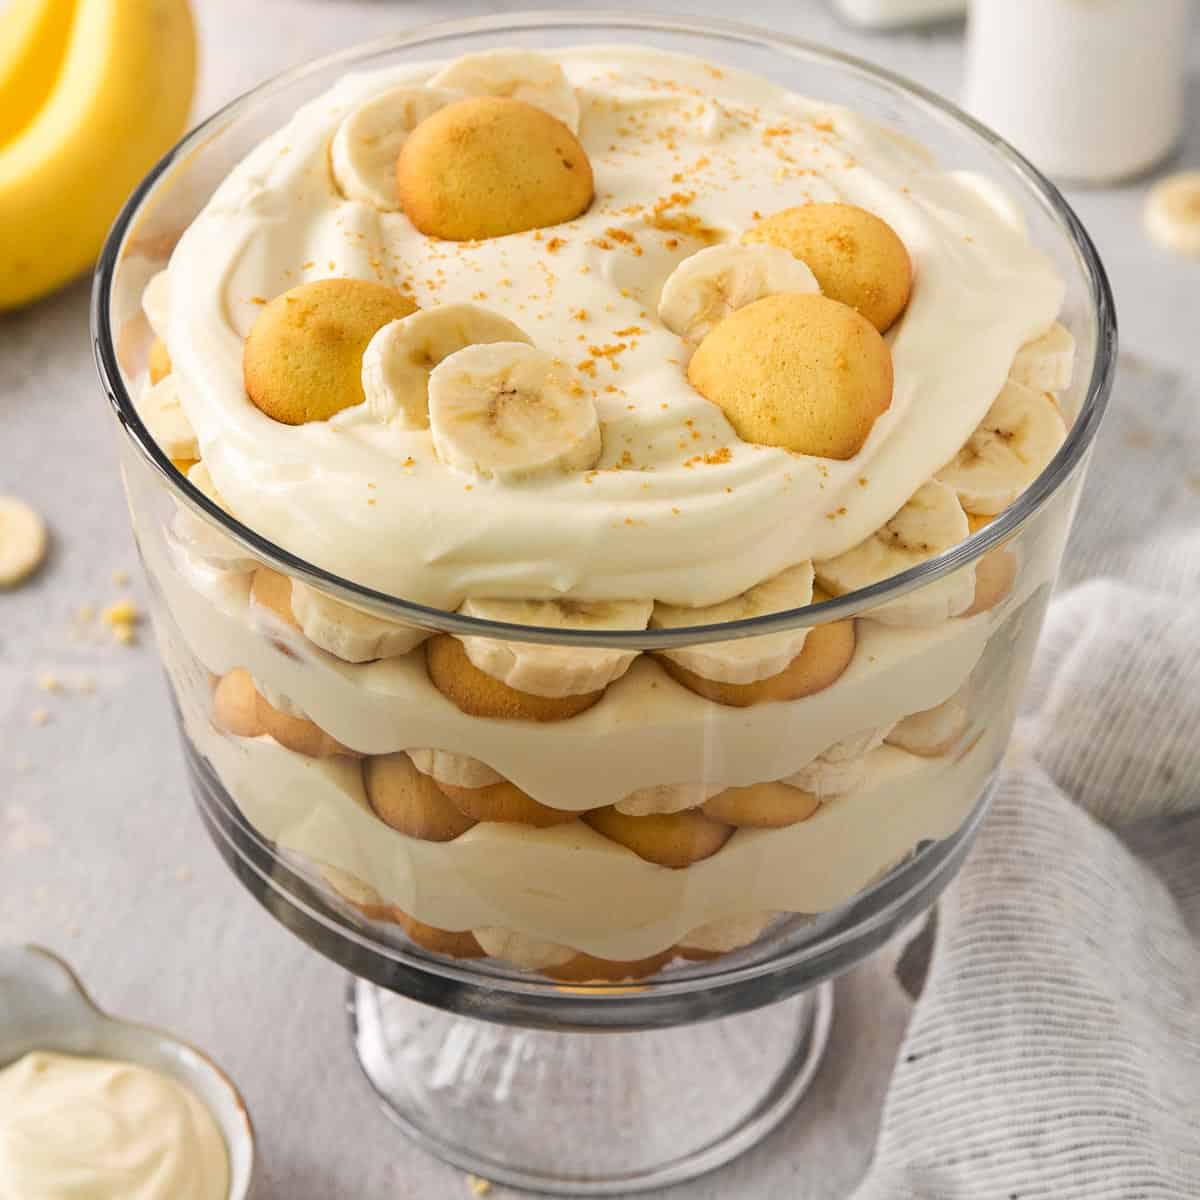 Gluten-free banana pudding in a trifle dish